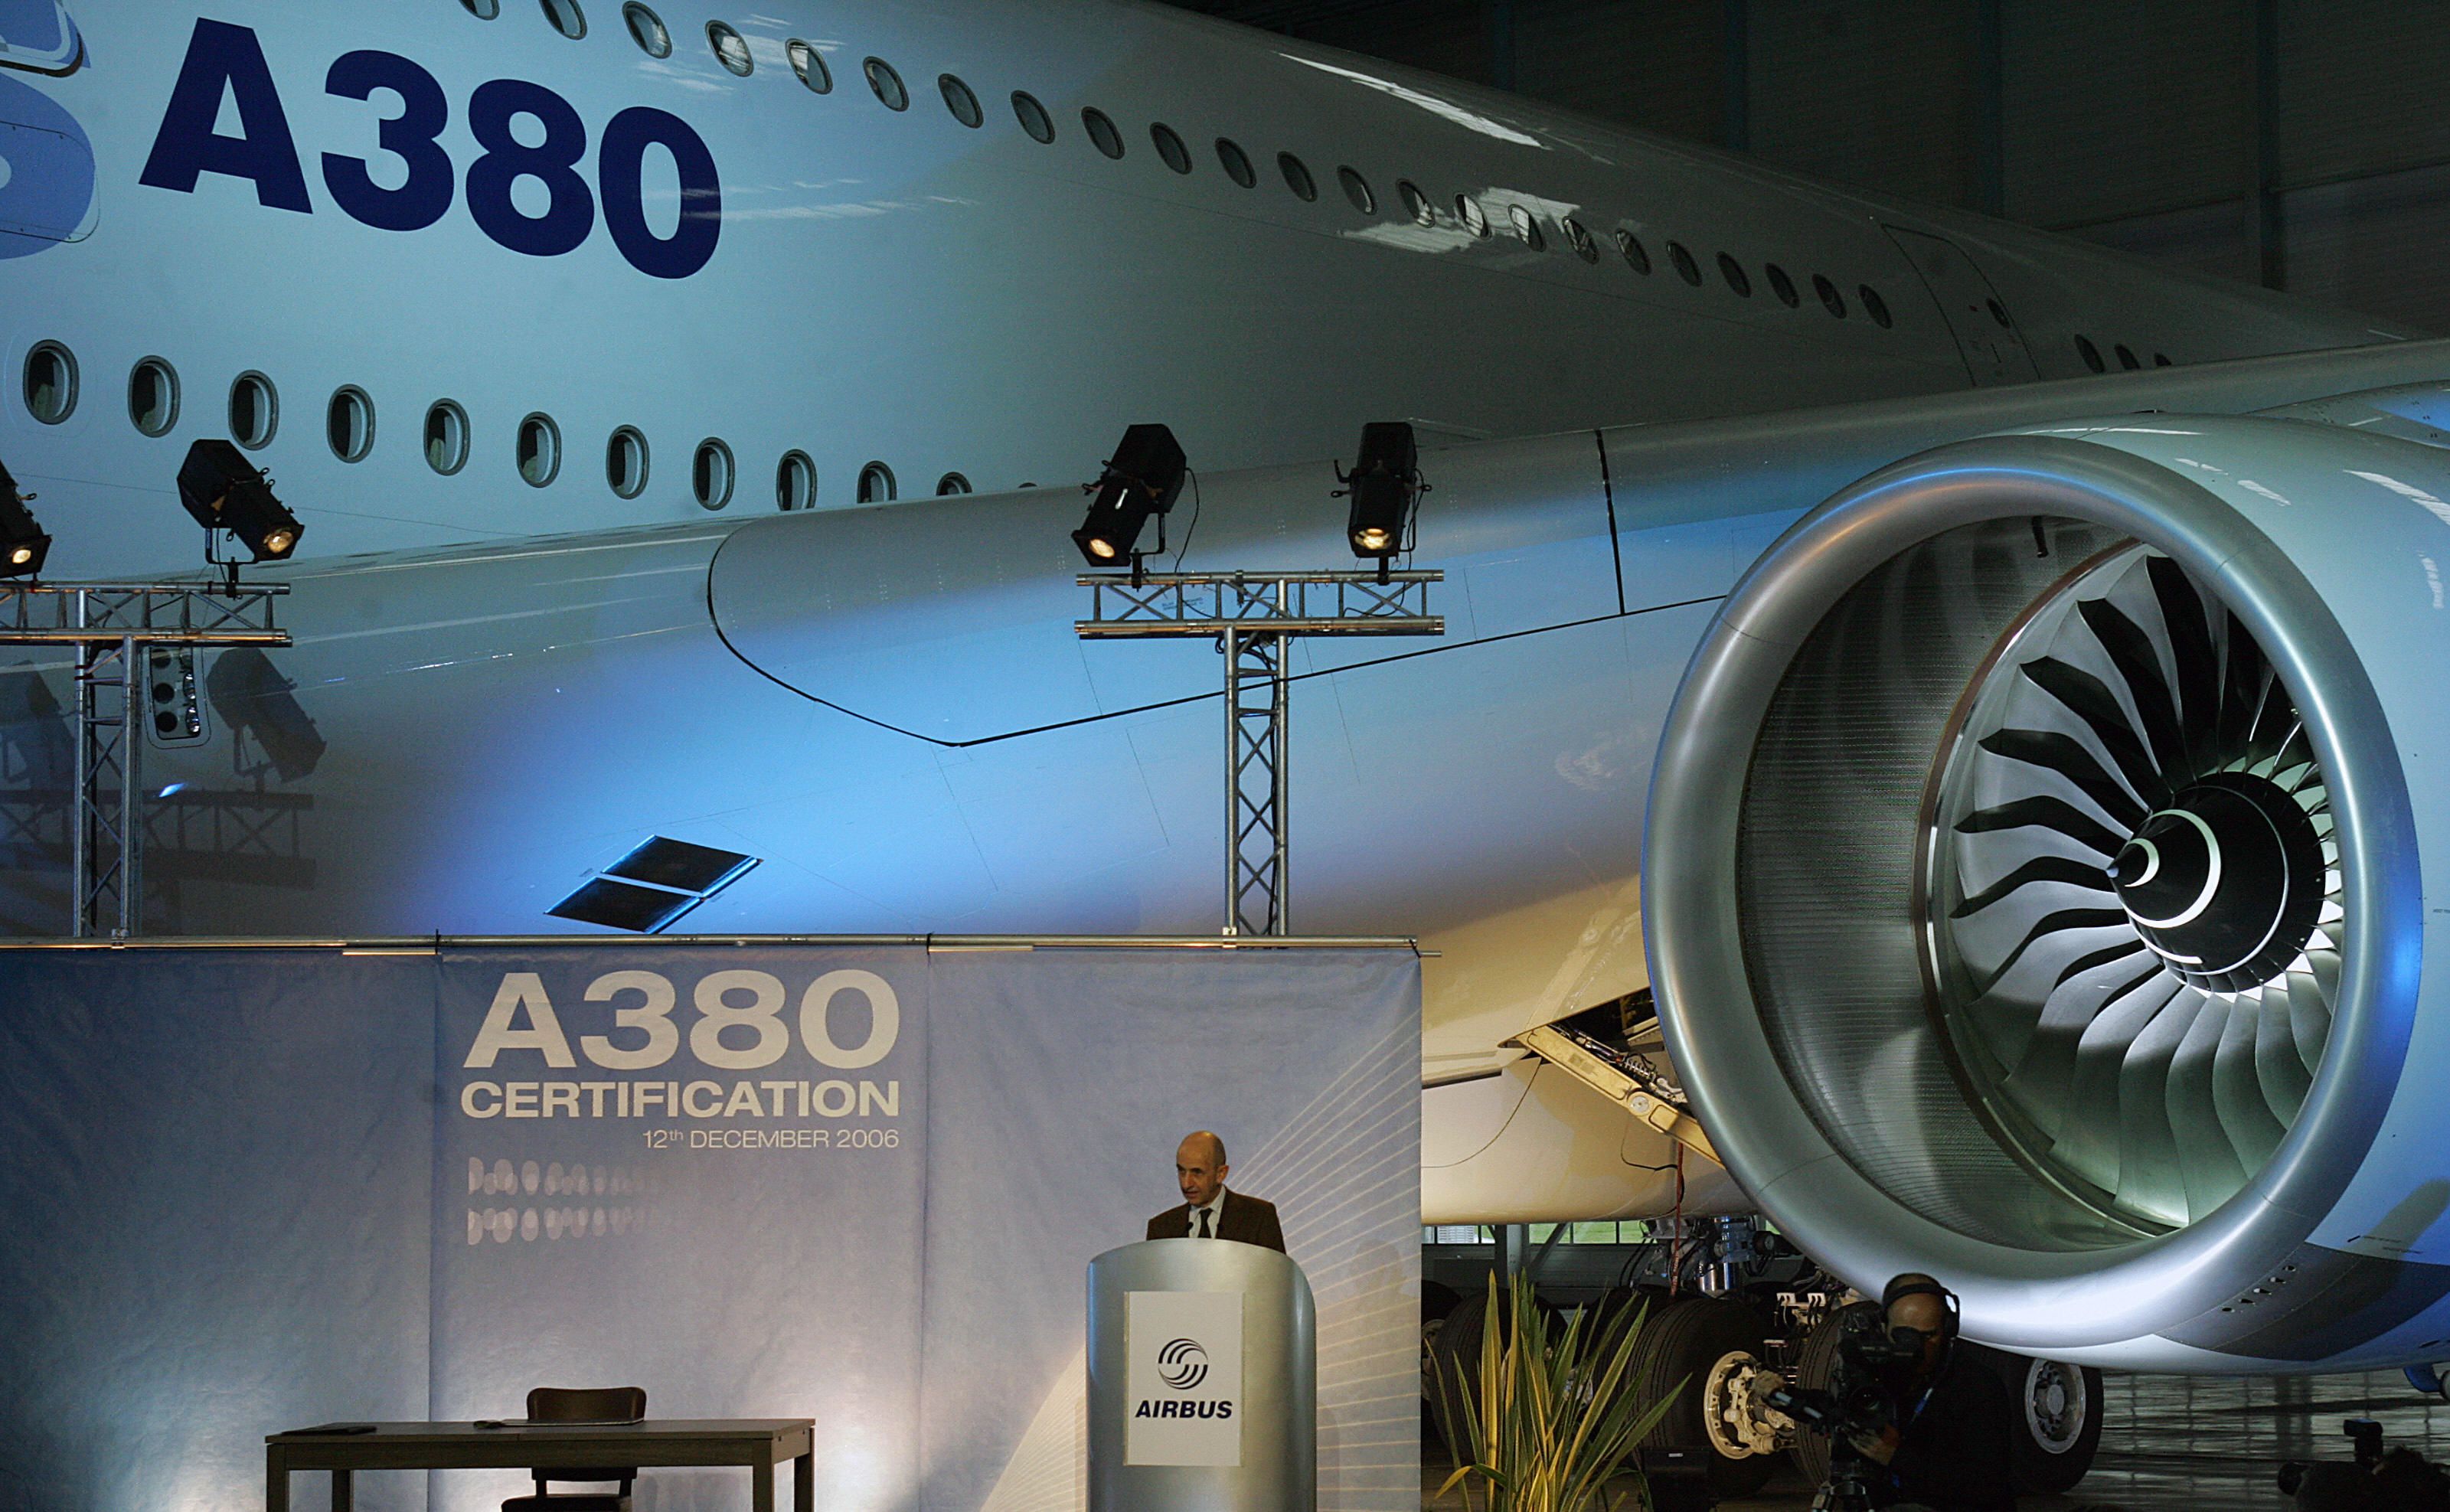 Airbus A380 certification in Toulouse